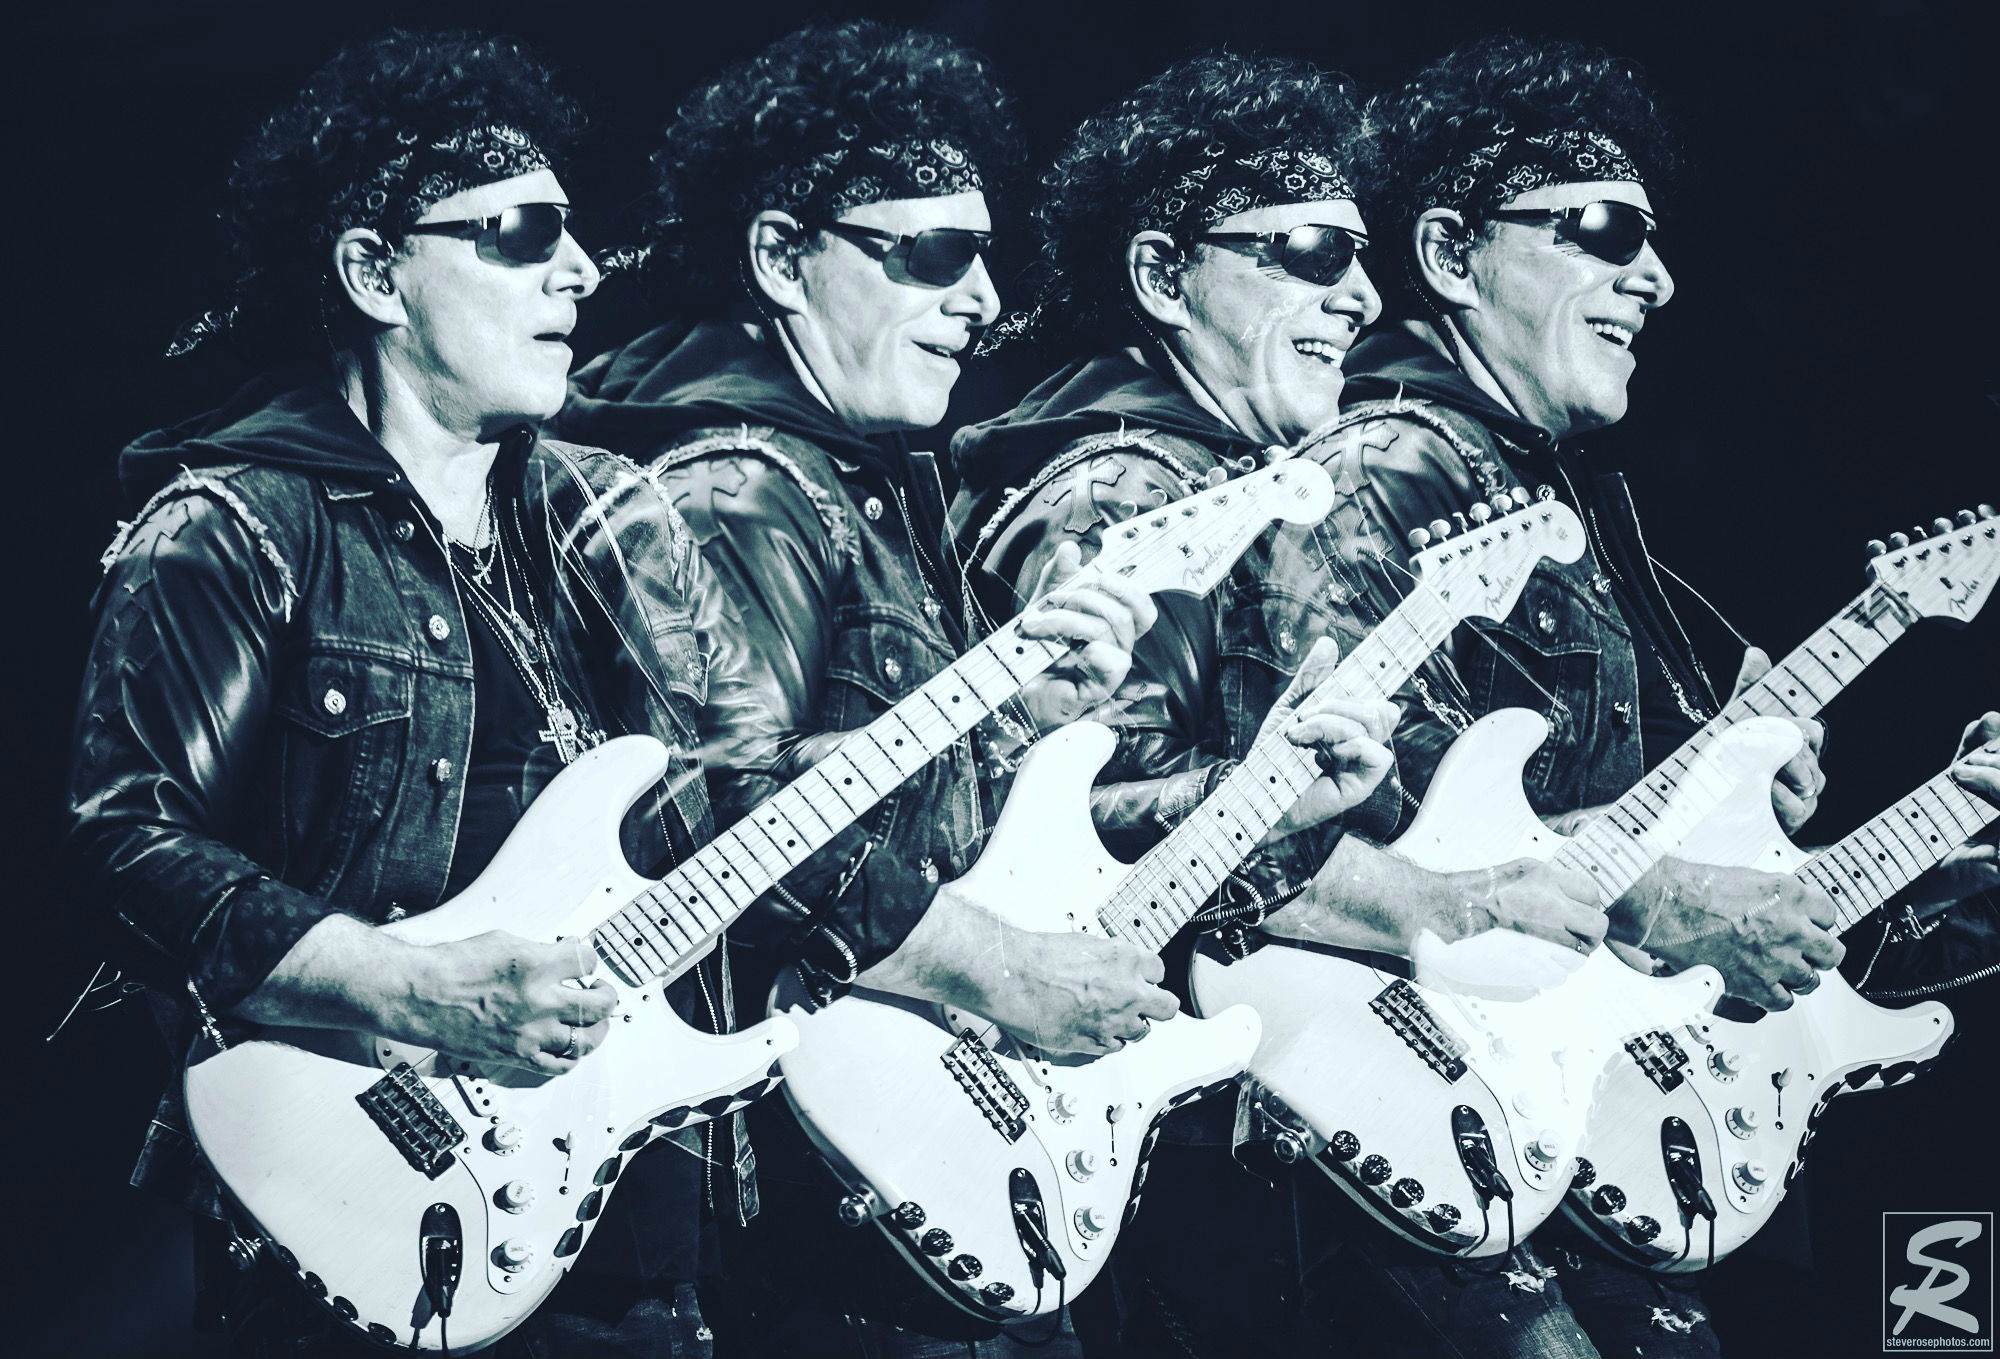 Quad Neal Schon playing white hot guitar licks